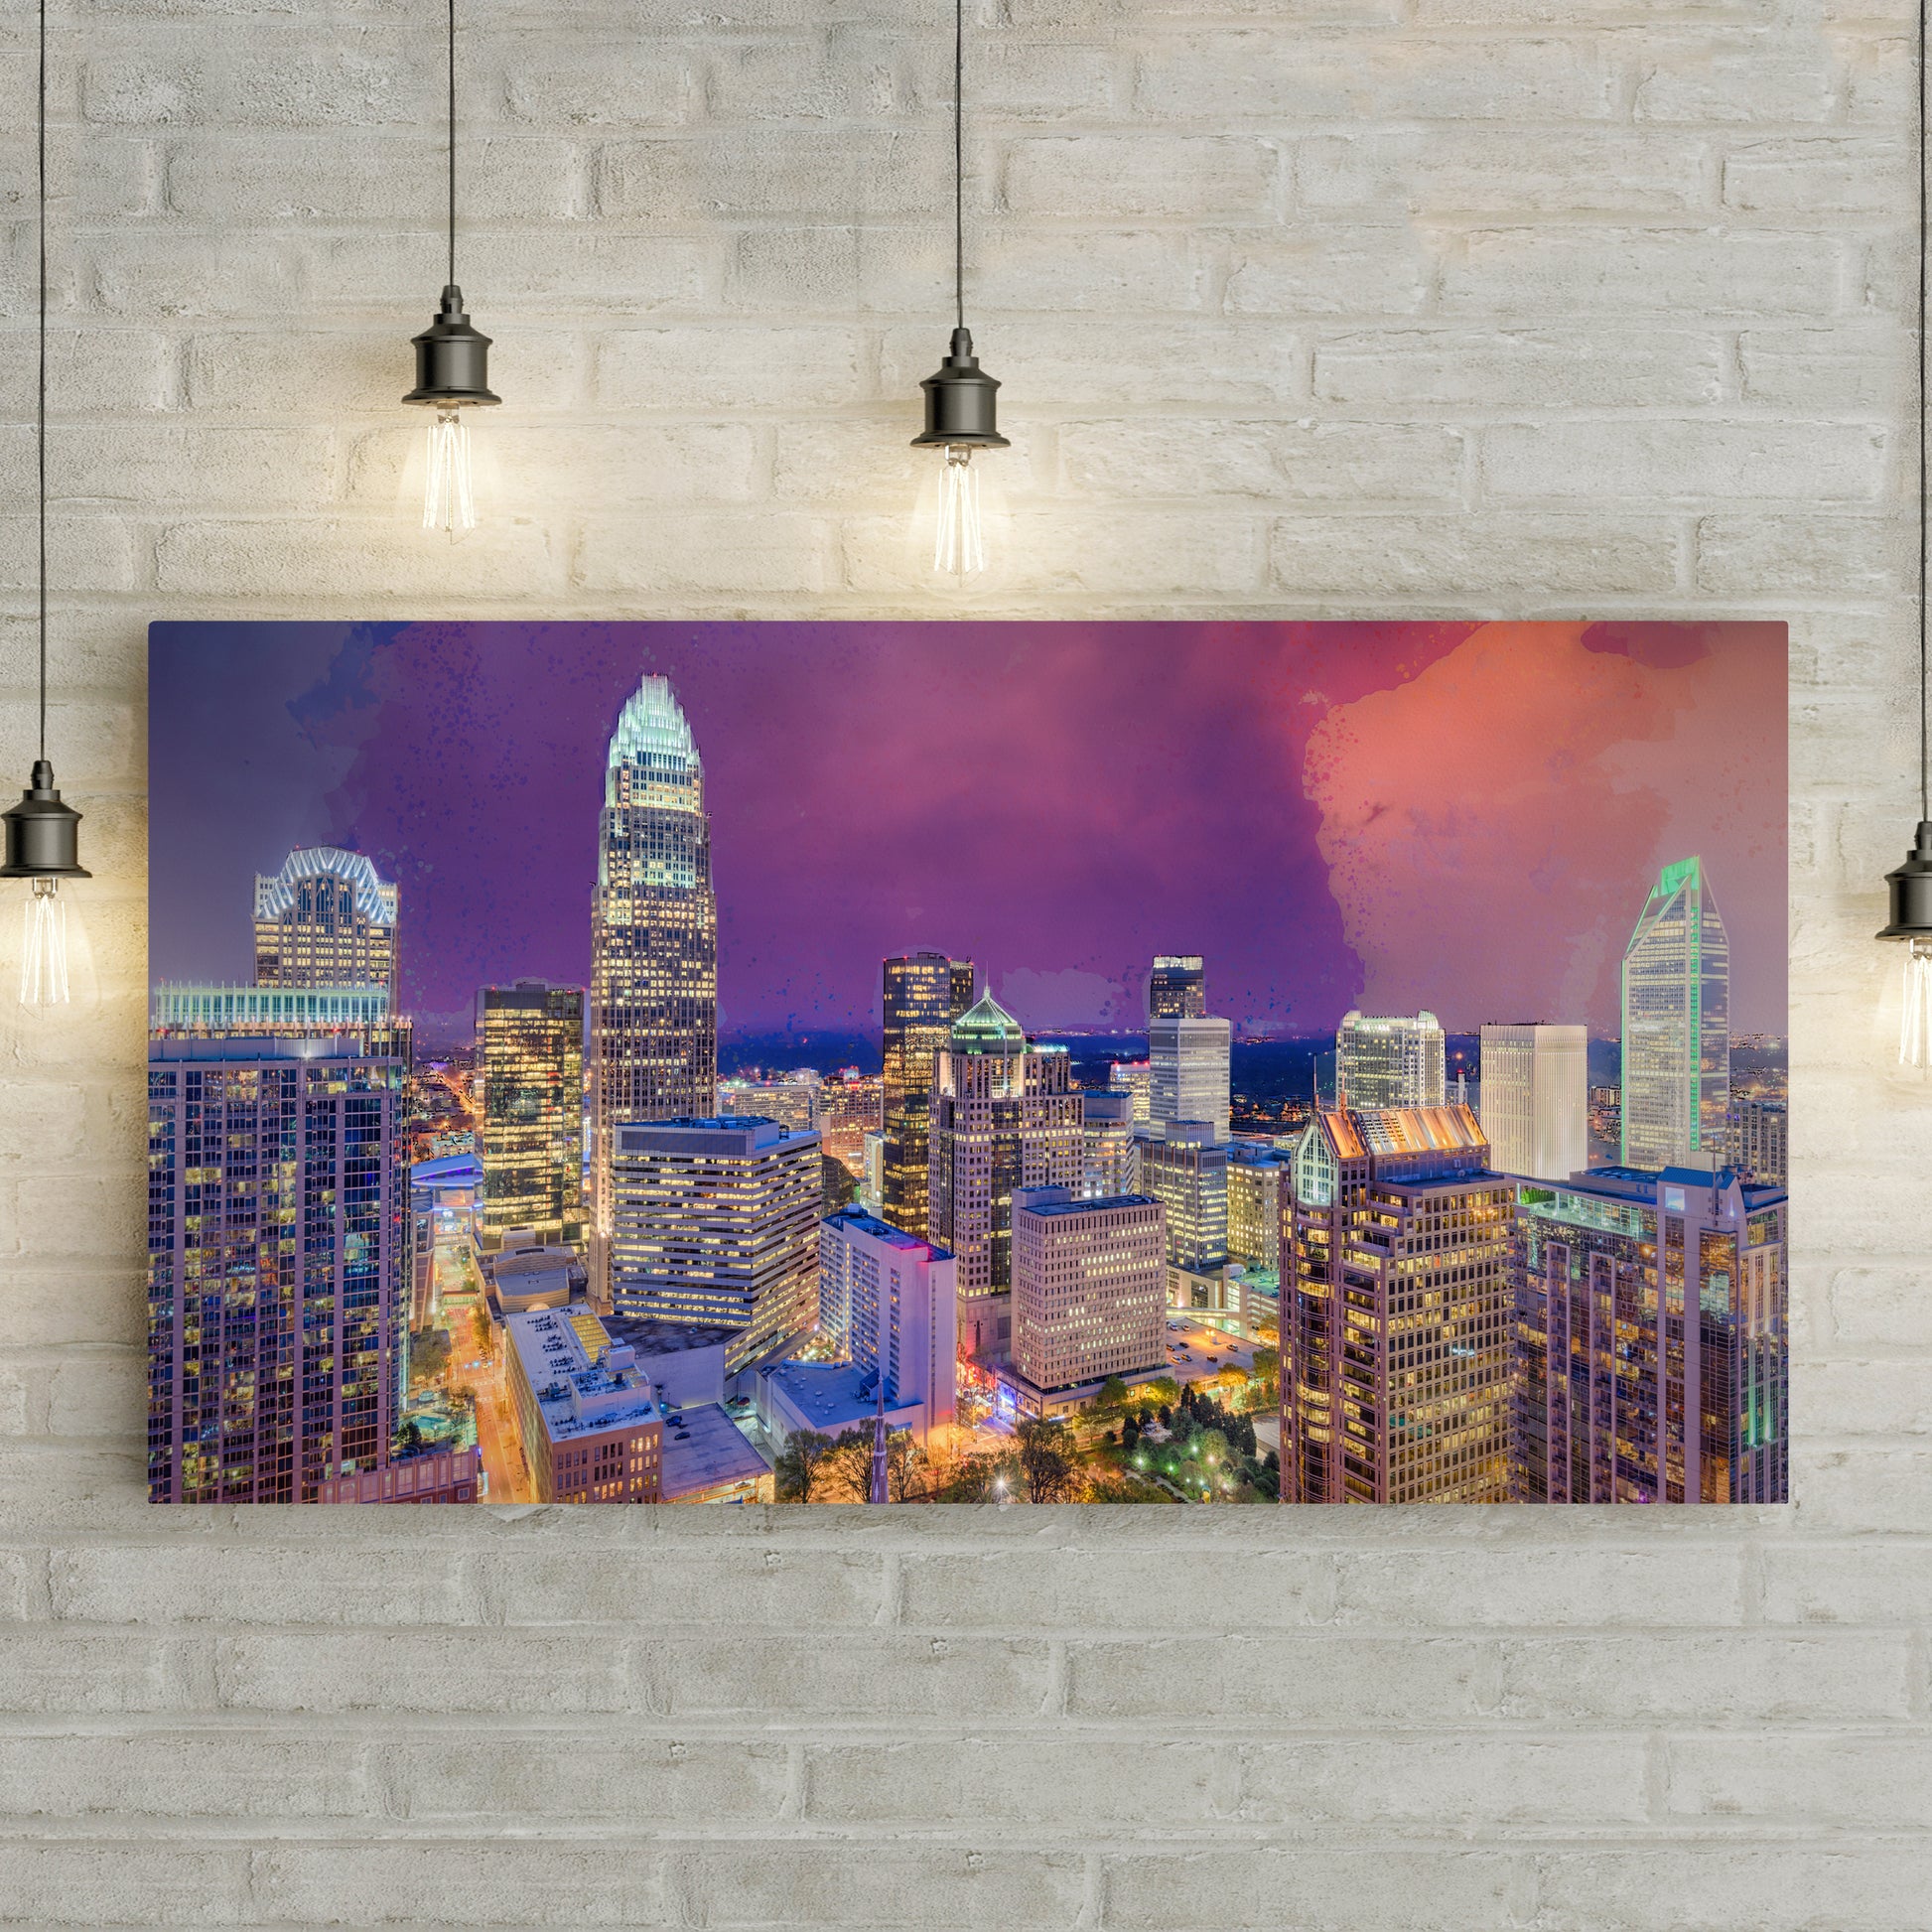 Charlotte Skyline Queen City At Dusk Canvas Wall Art - Image by Tailored Canvases